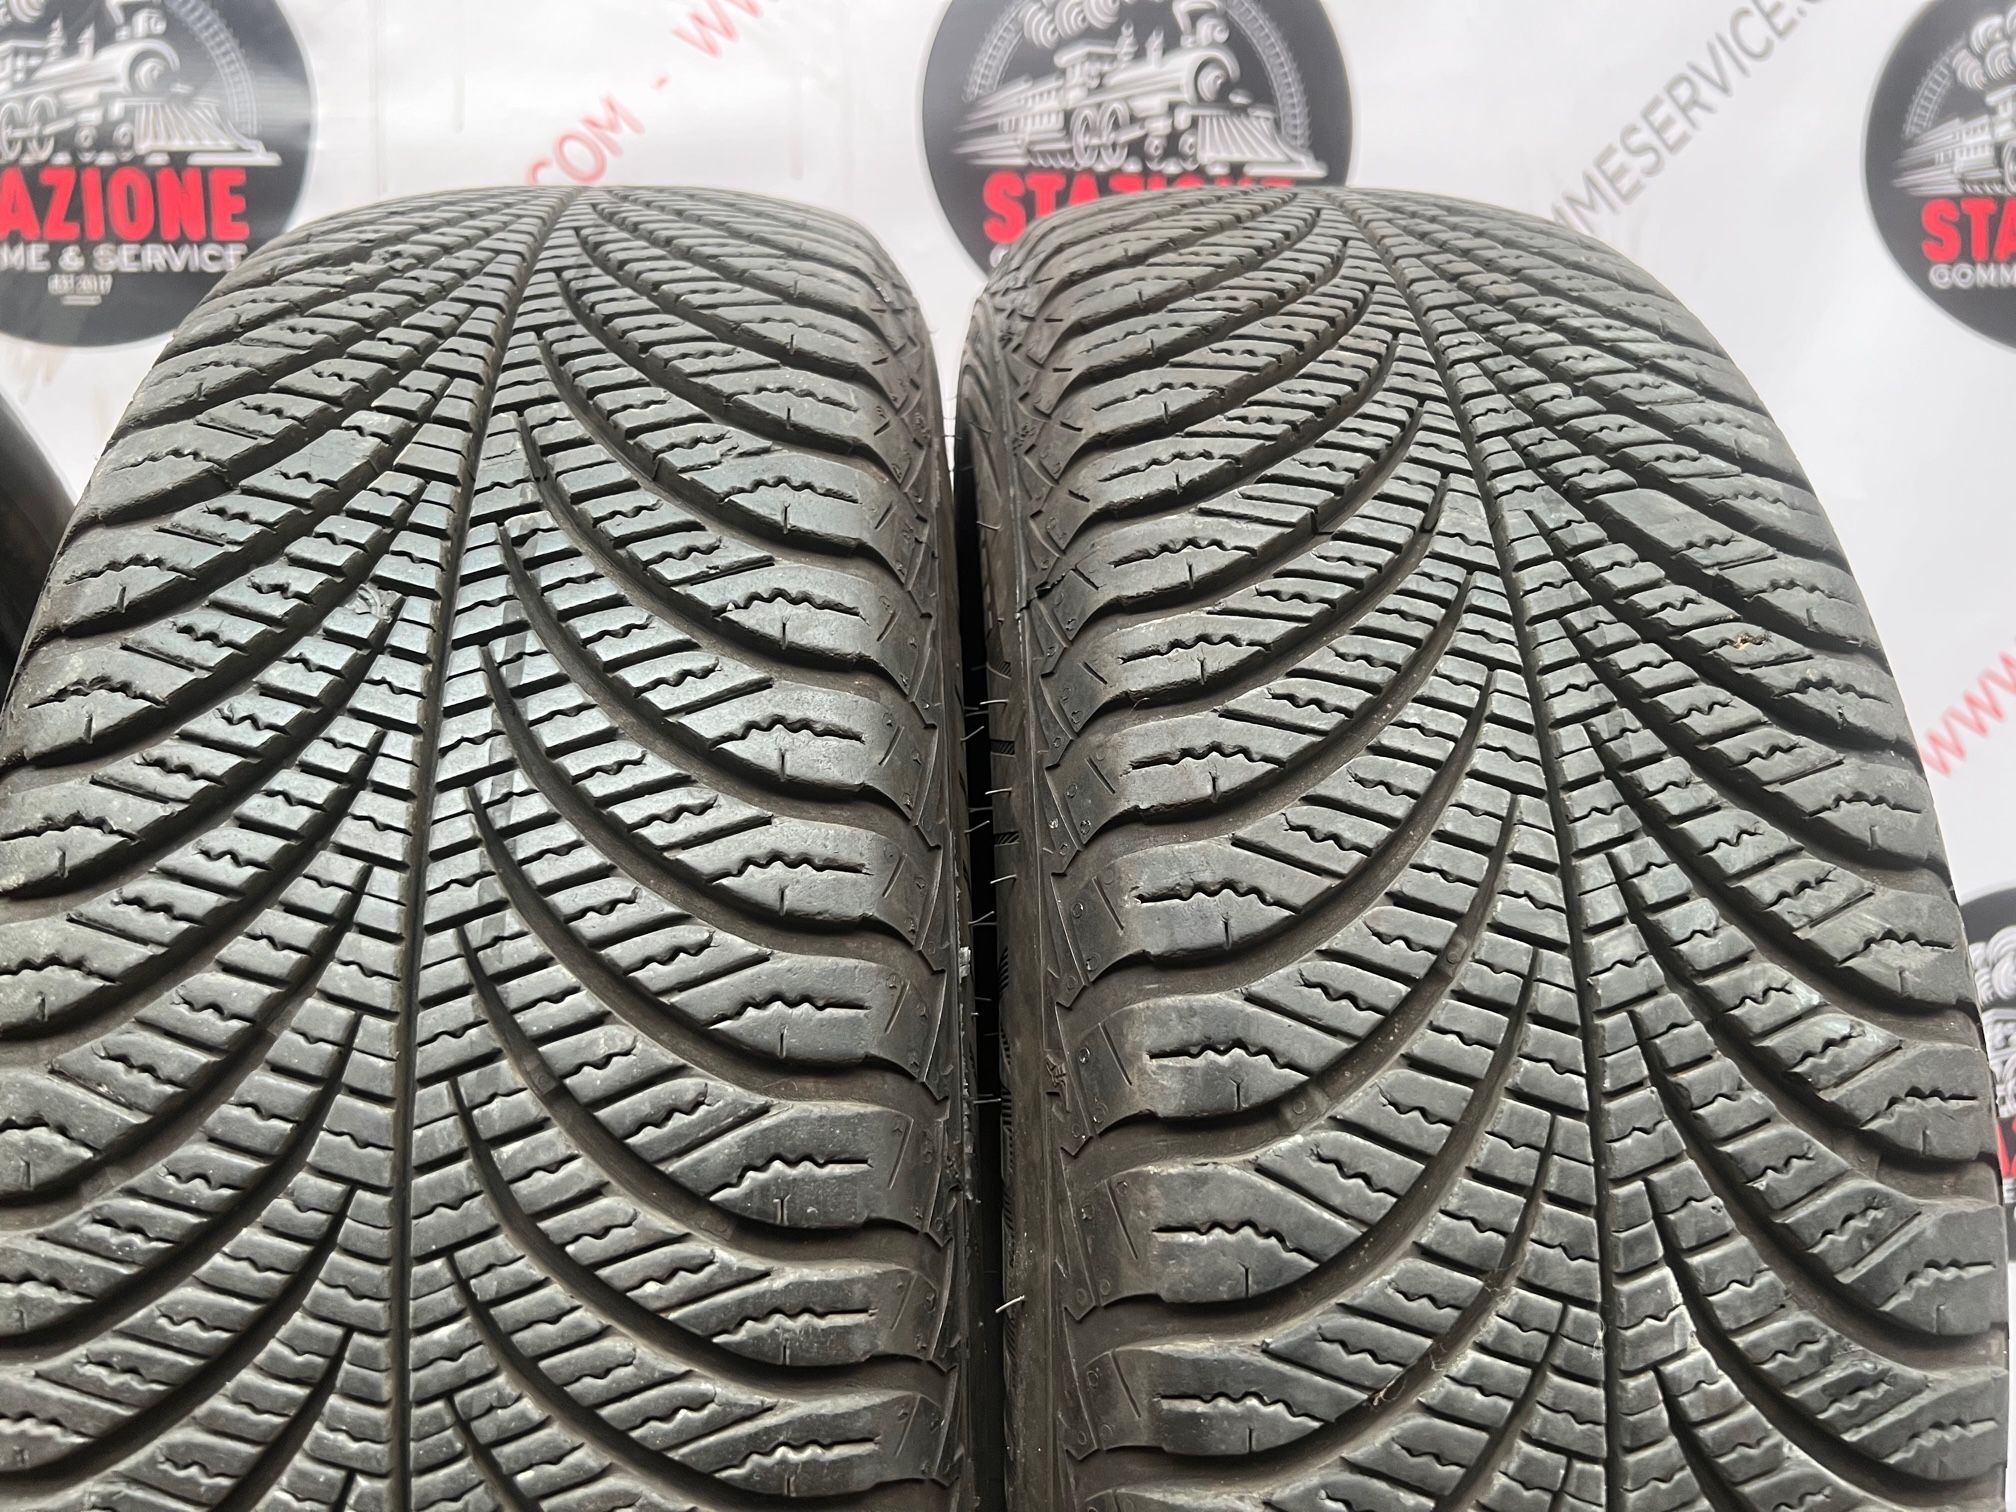 Gomme 4 stagioni usate GOODYEAR 175/65 R14